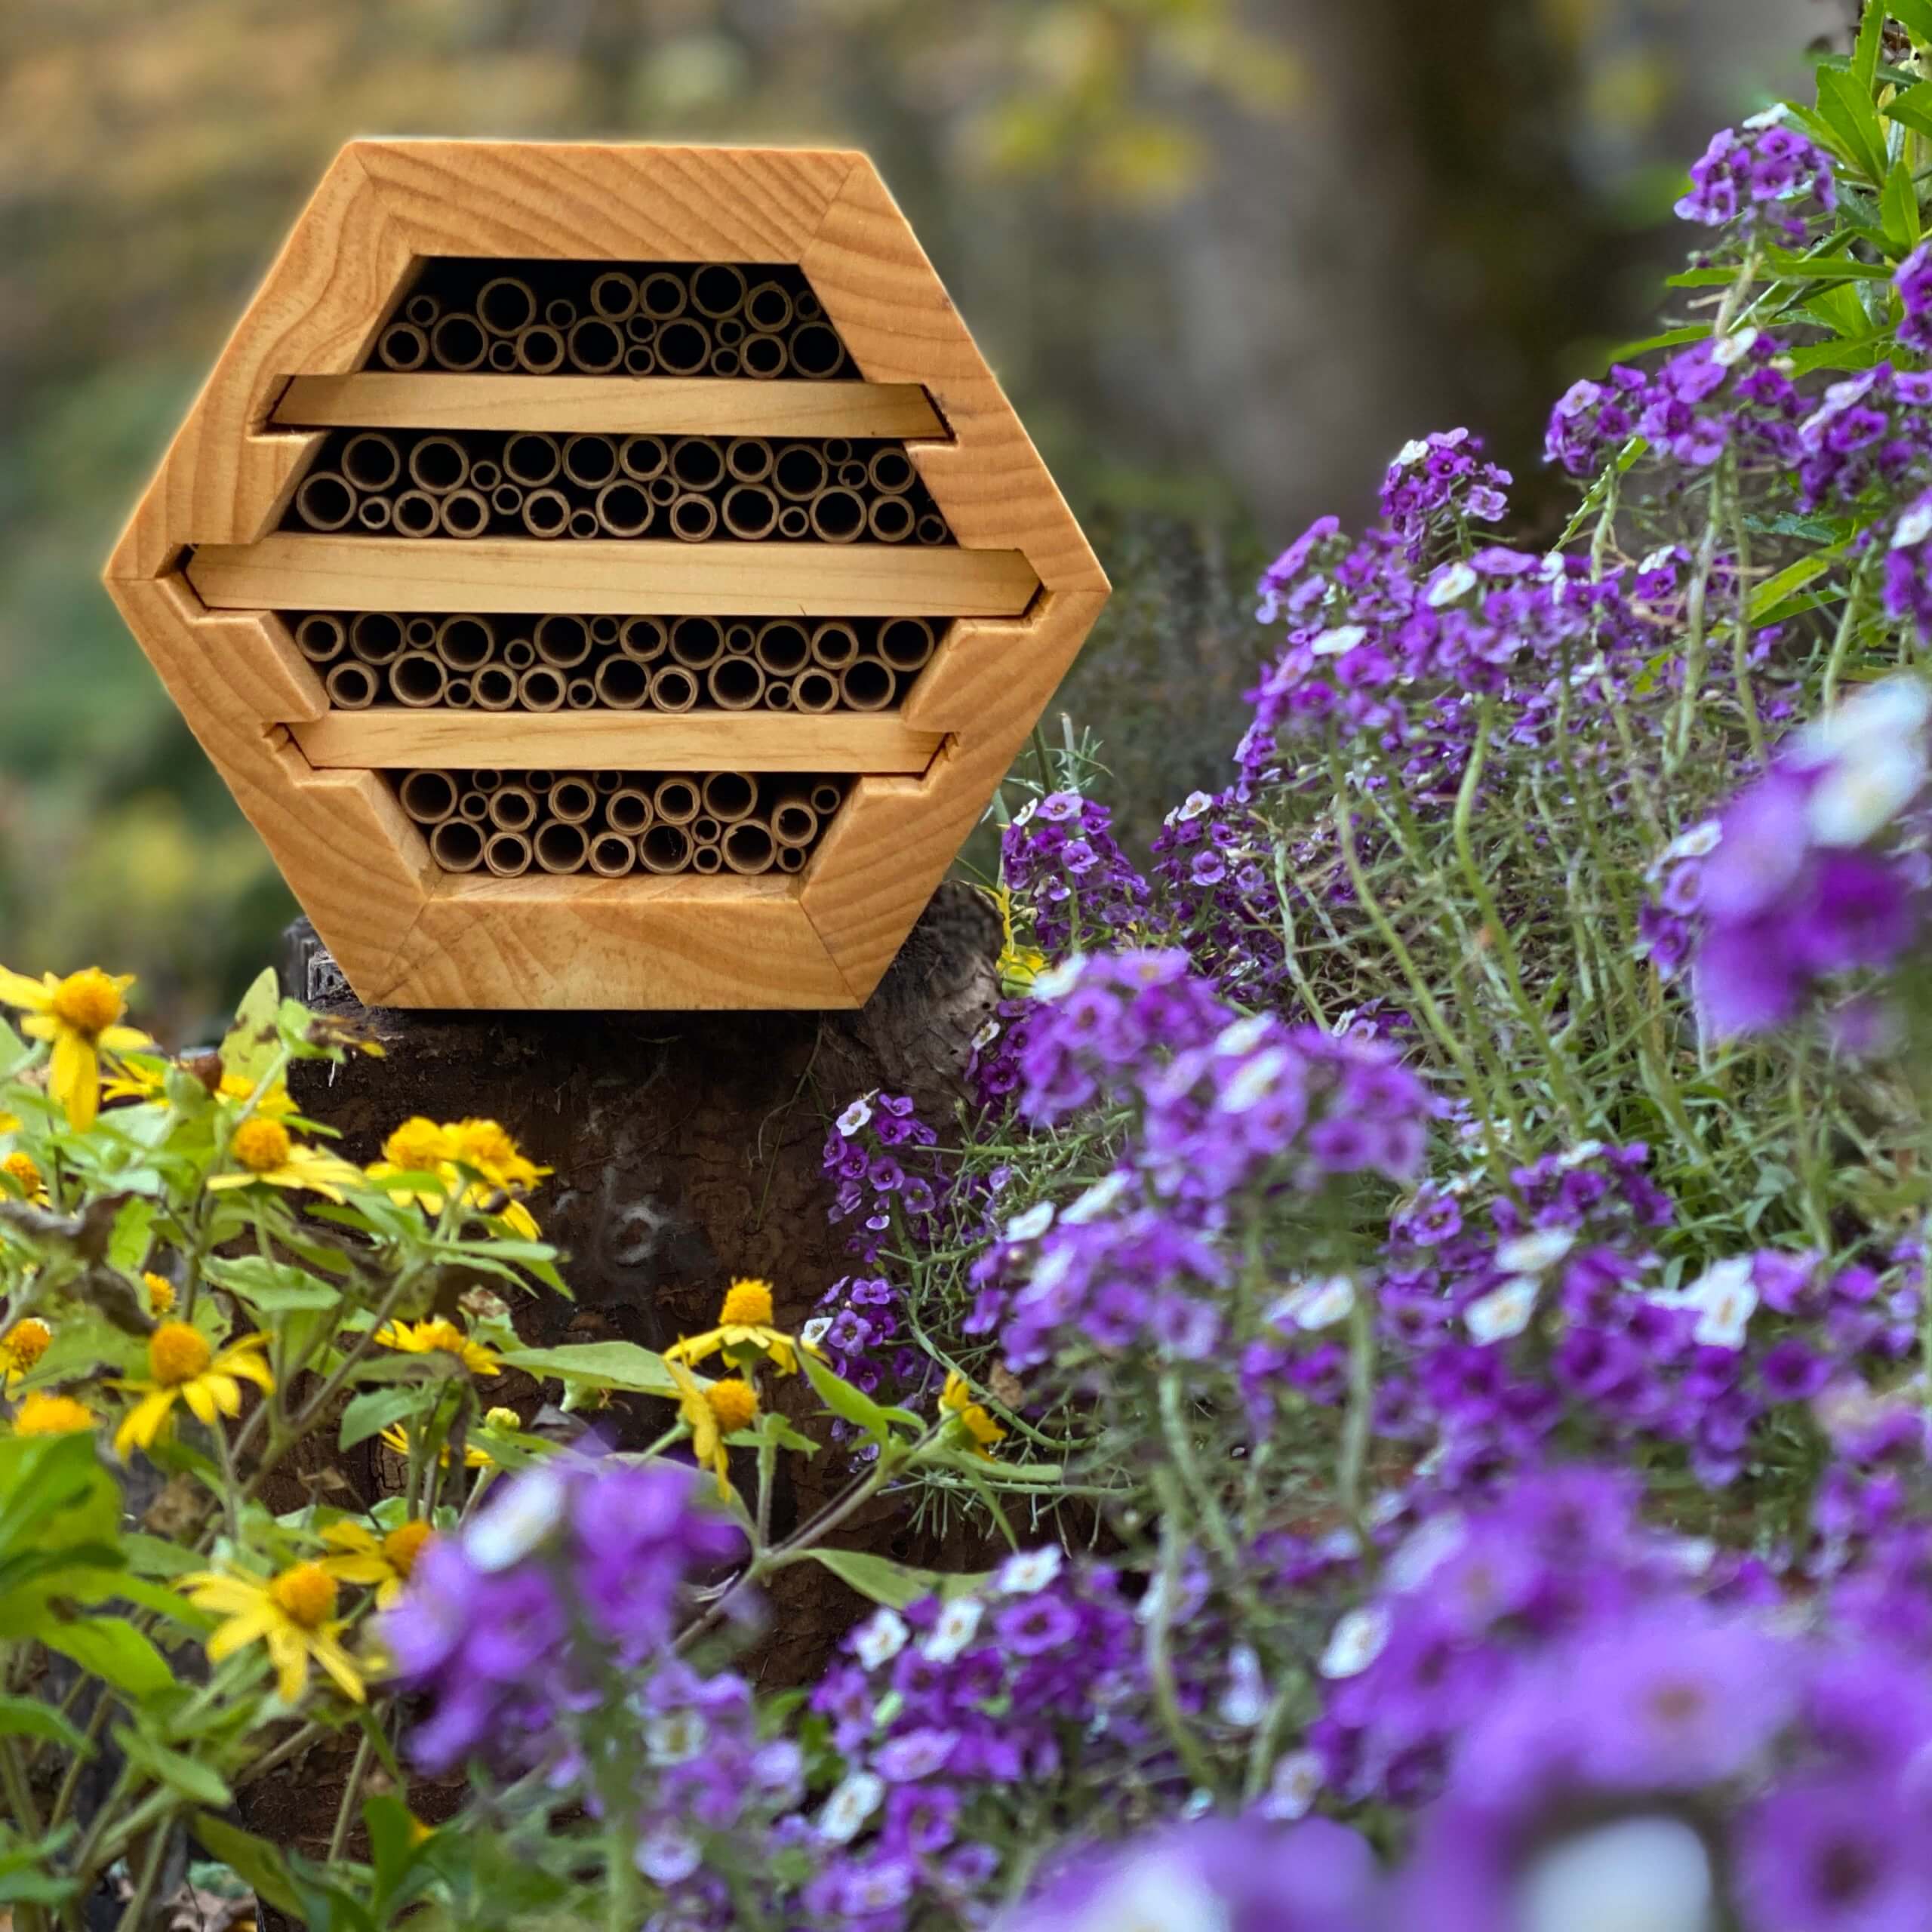 The exclusive native bee house by The Bee Conservancy